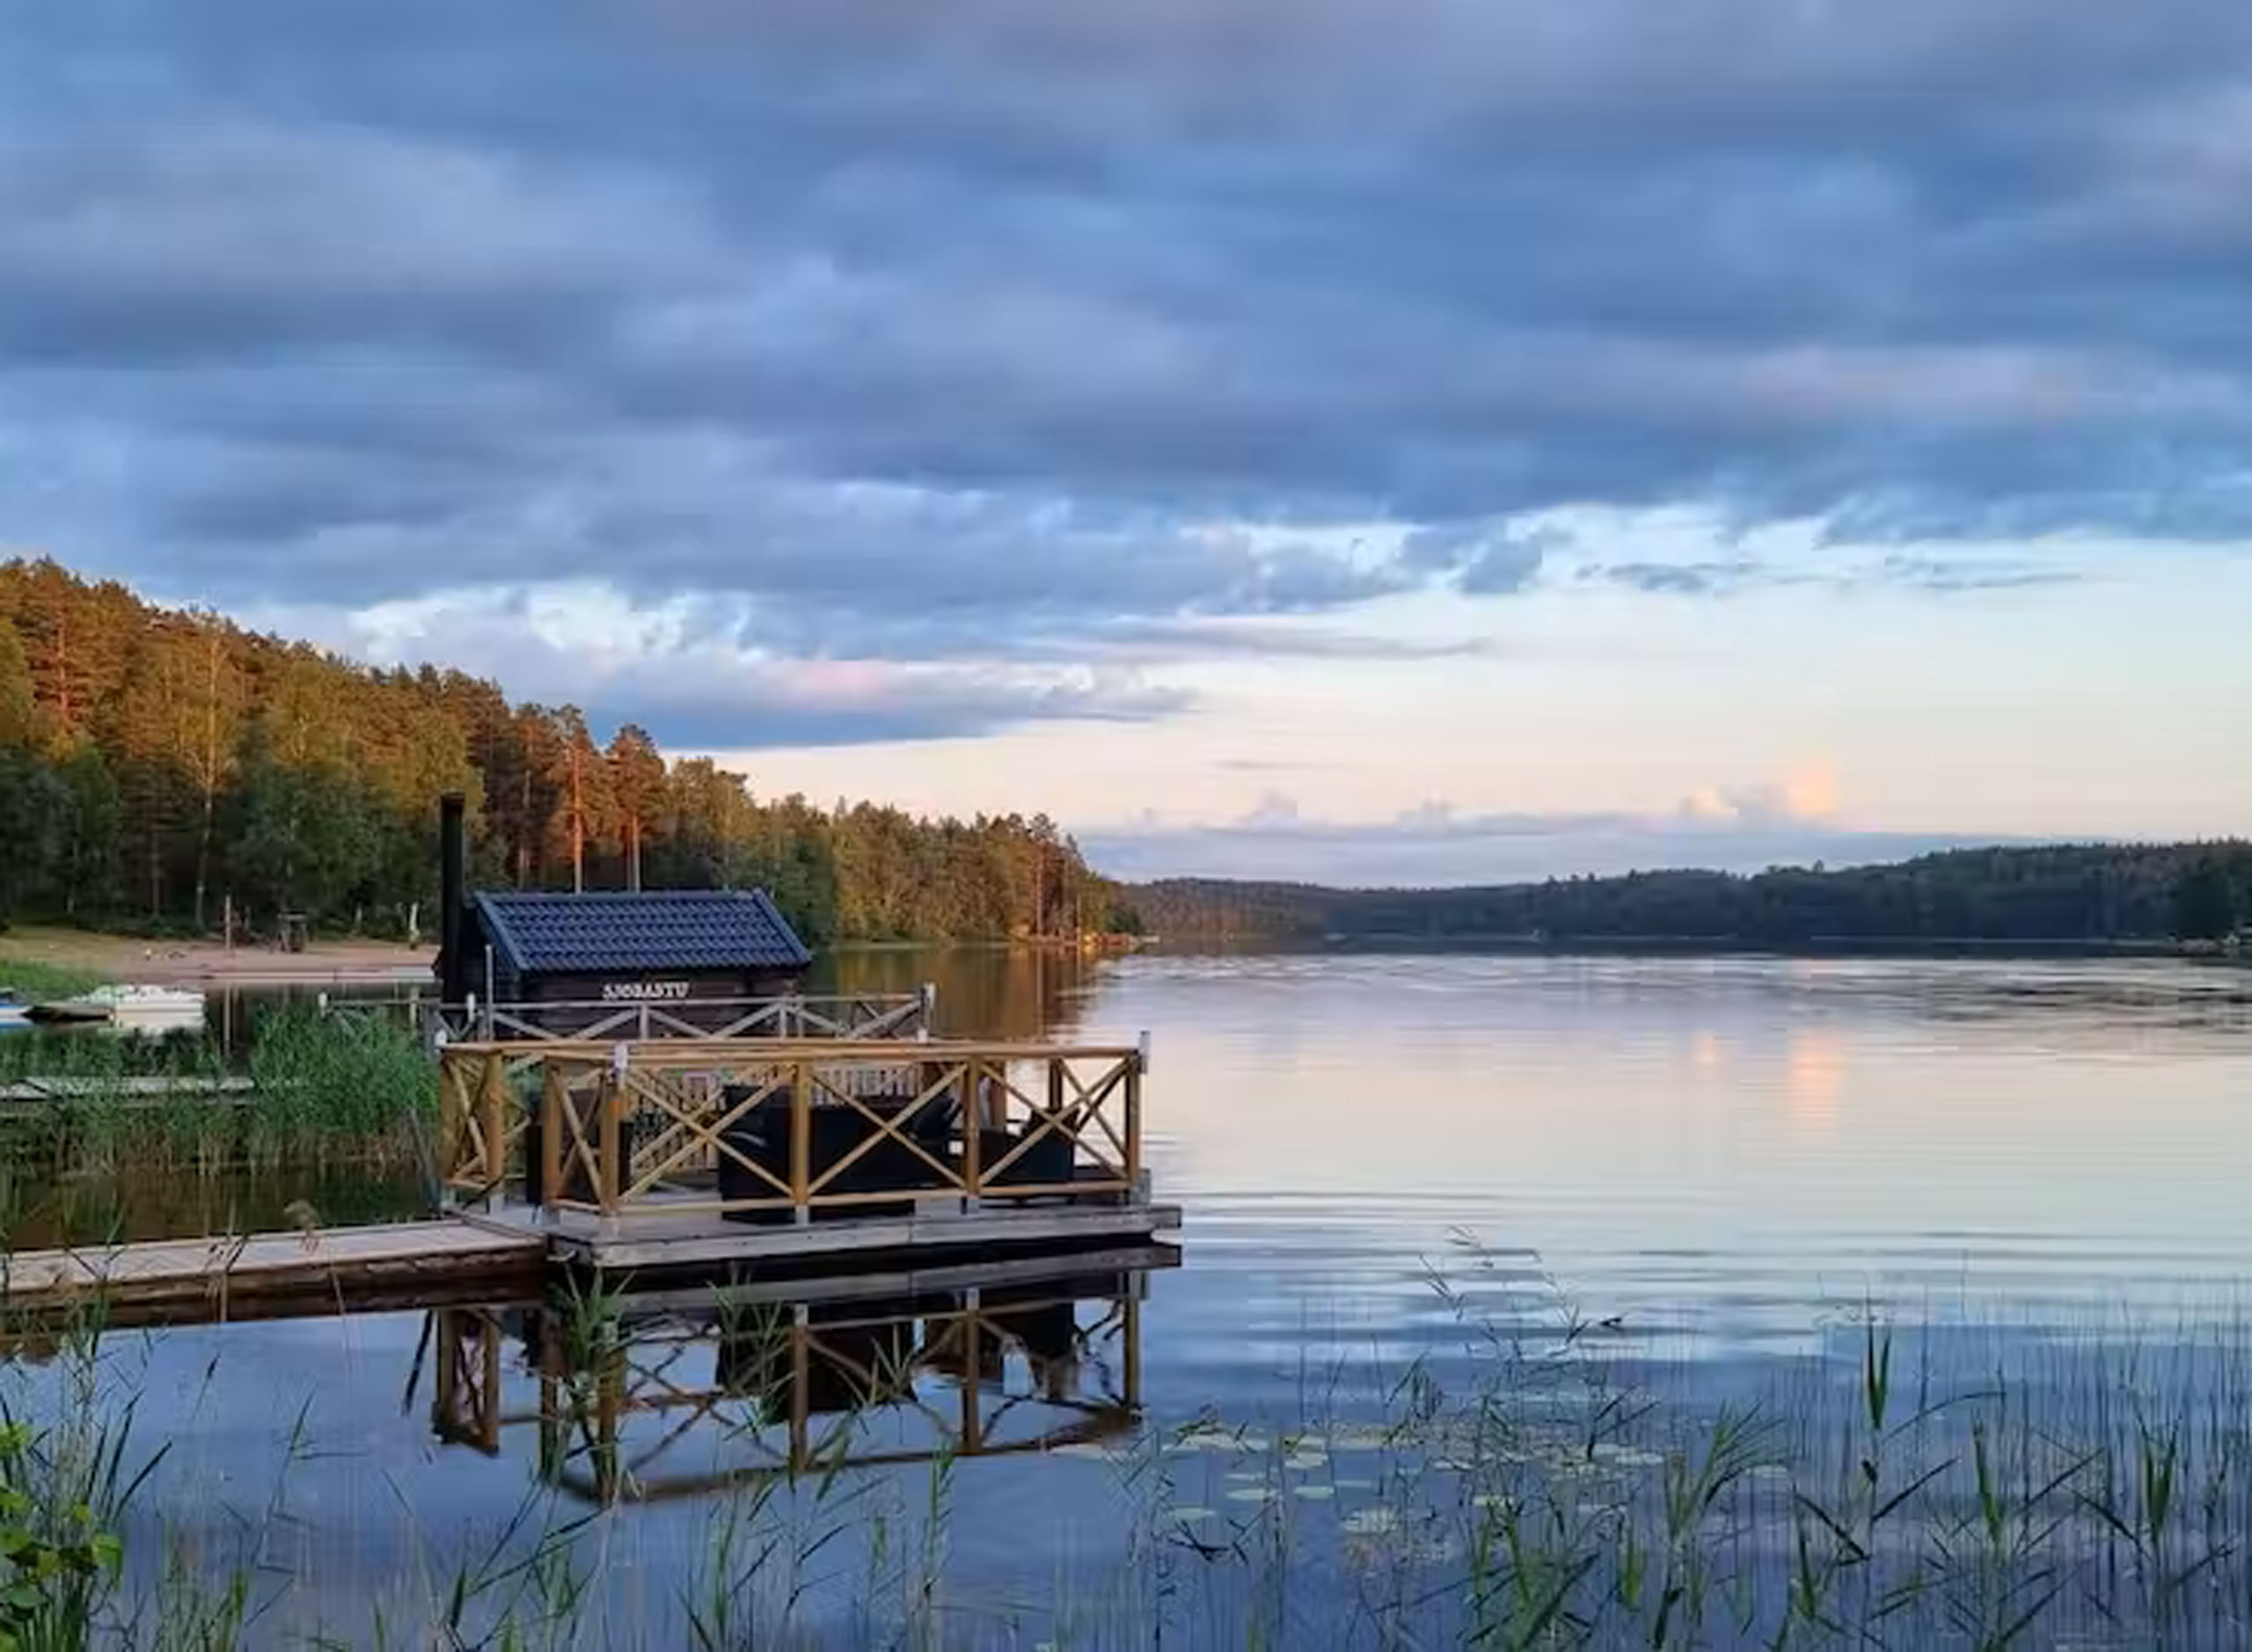 Vimmerby Camping is beautifully located by Lake Nossen. Copyright: Pintrip.de